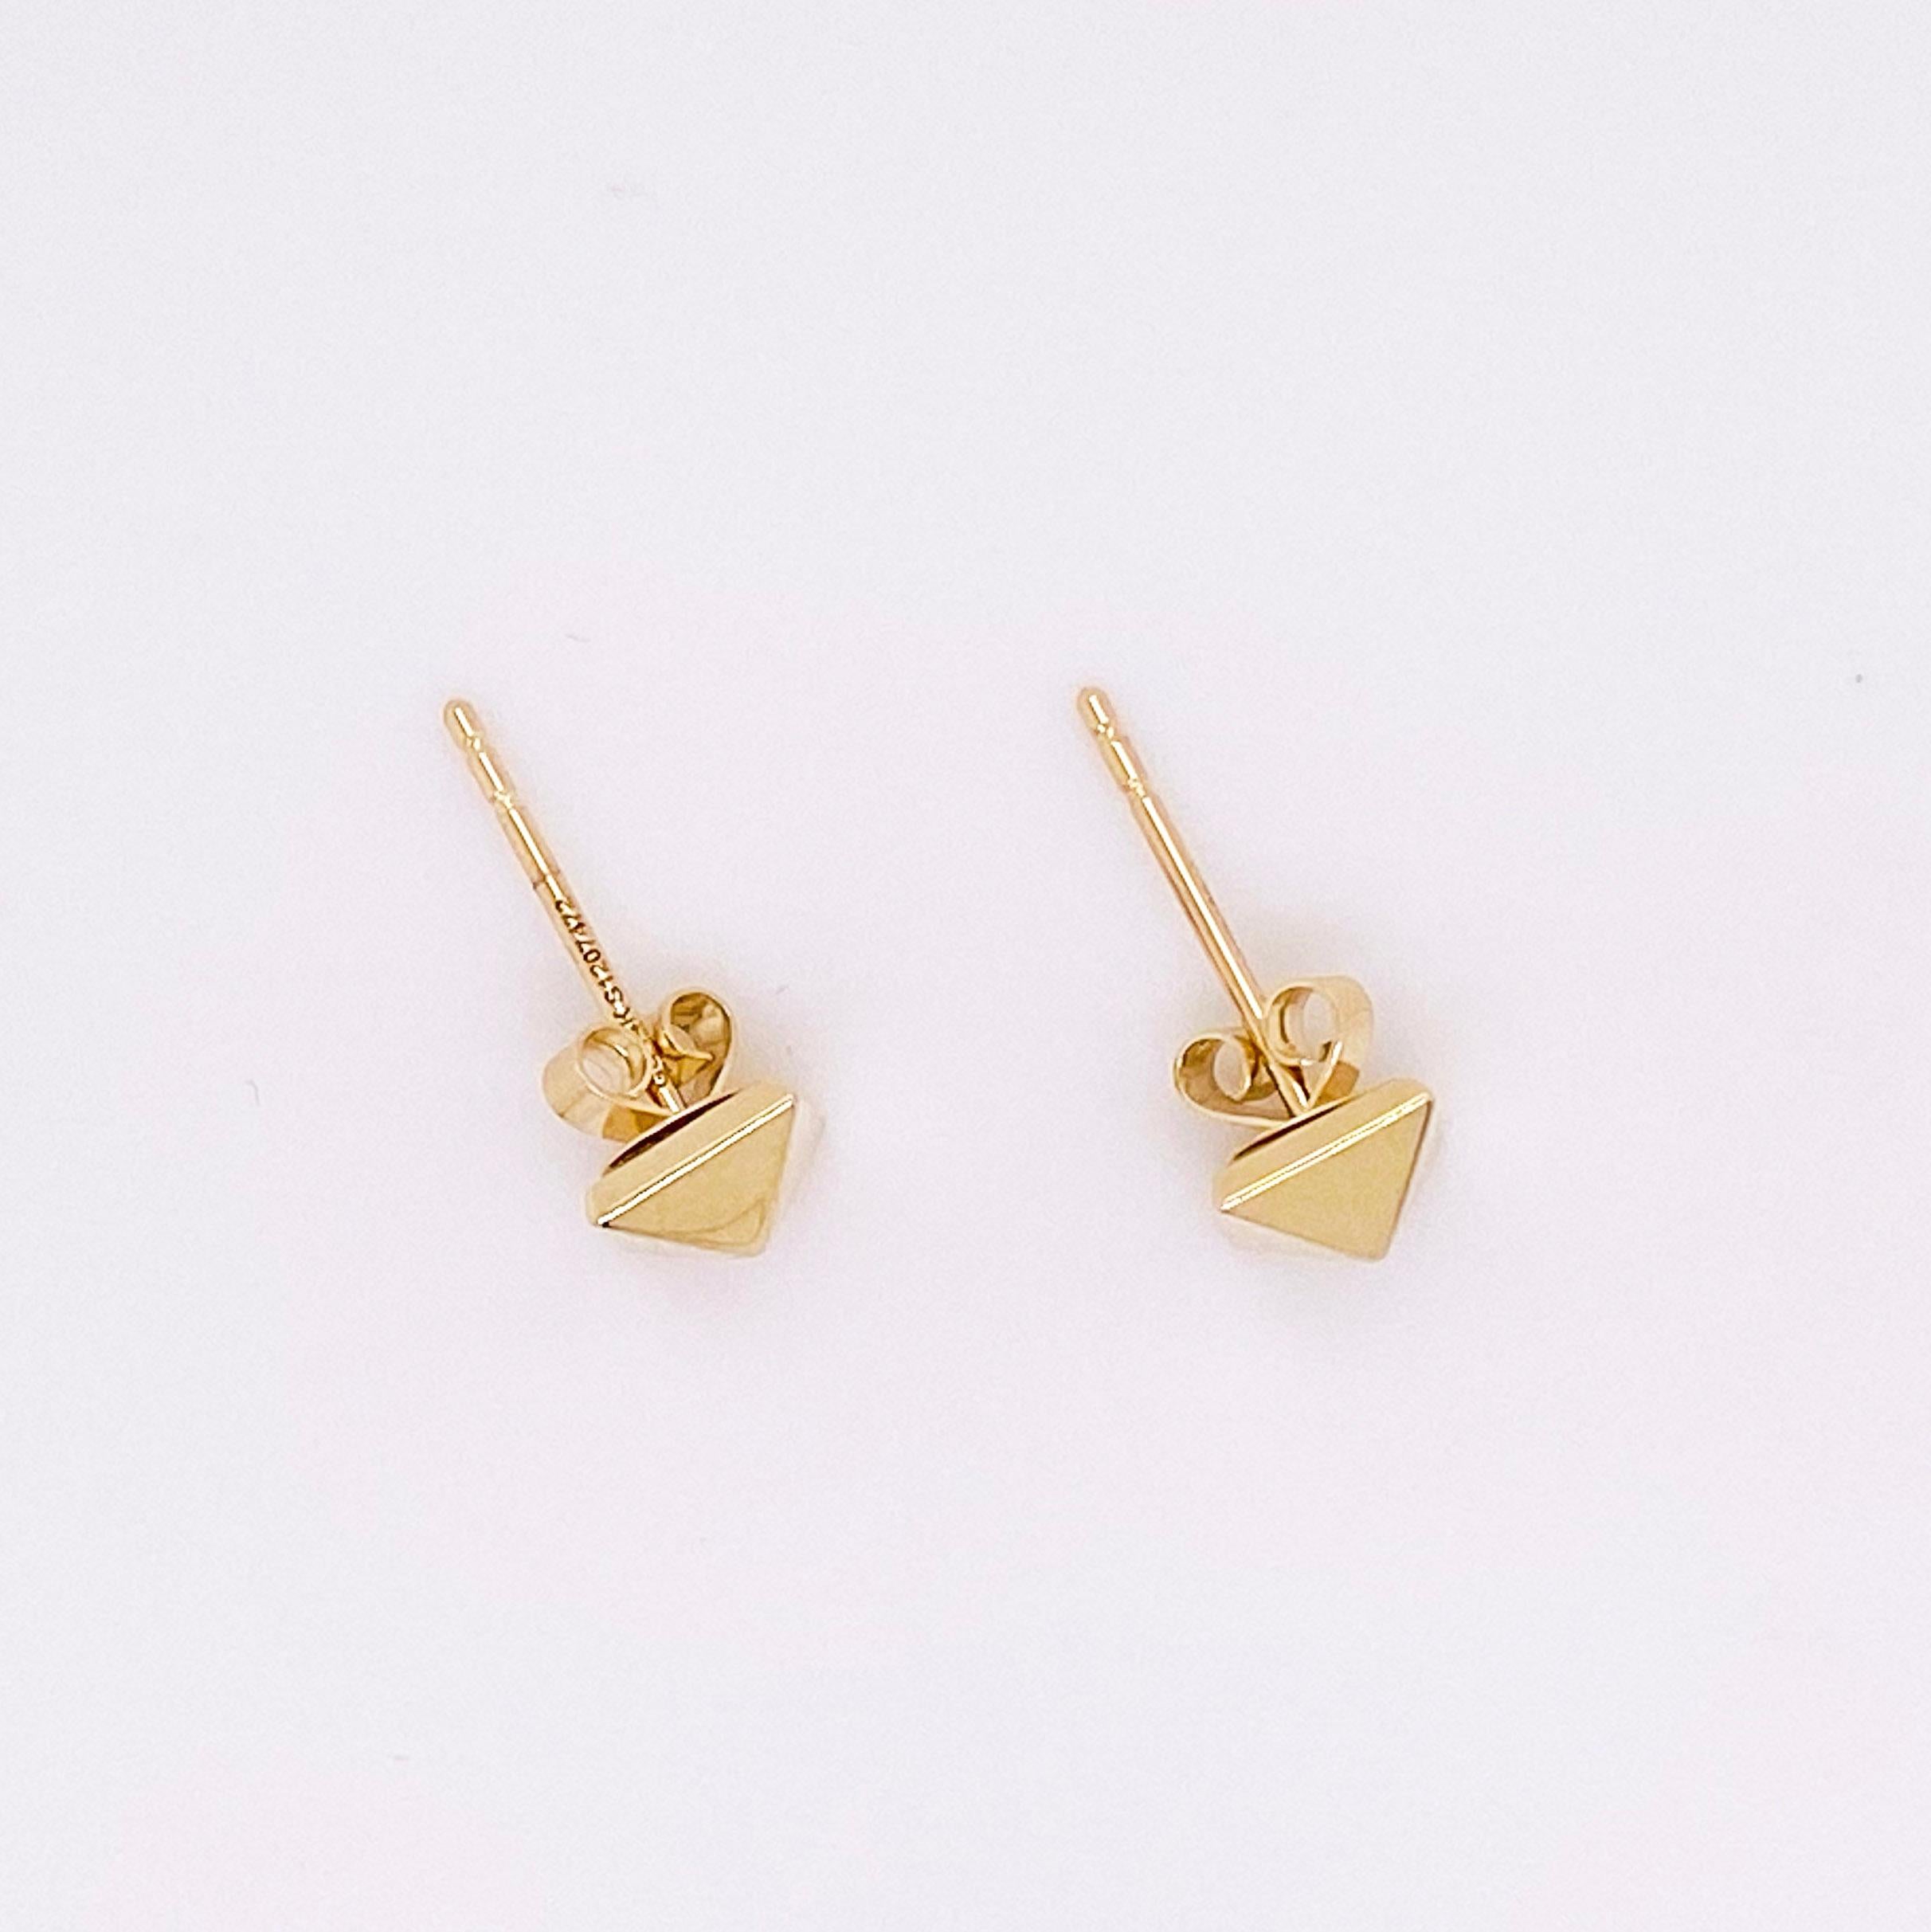 Women's Square Pyramid Earrings, 14 Karat Yellow Gold Pyramid Stud Earrings, Post Square For Sale